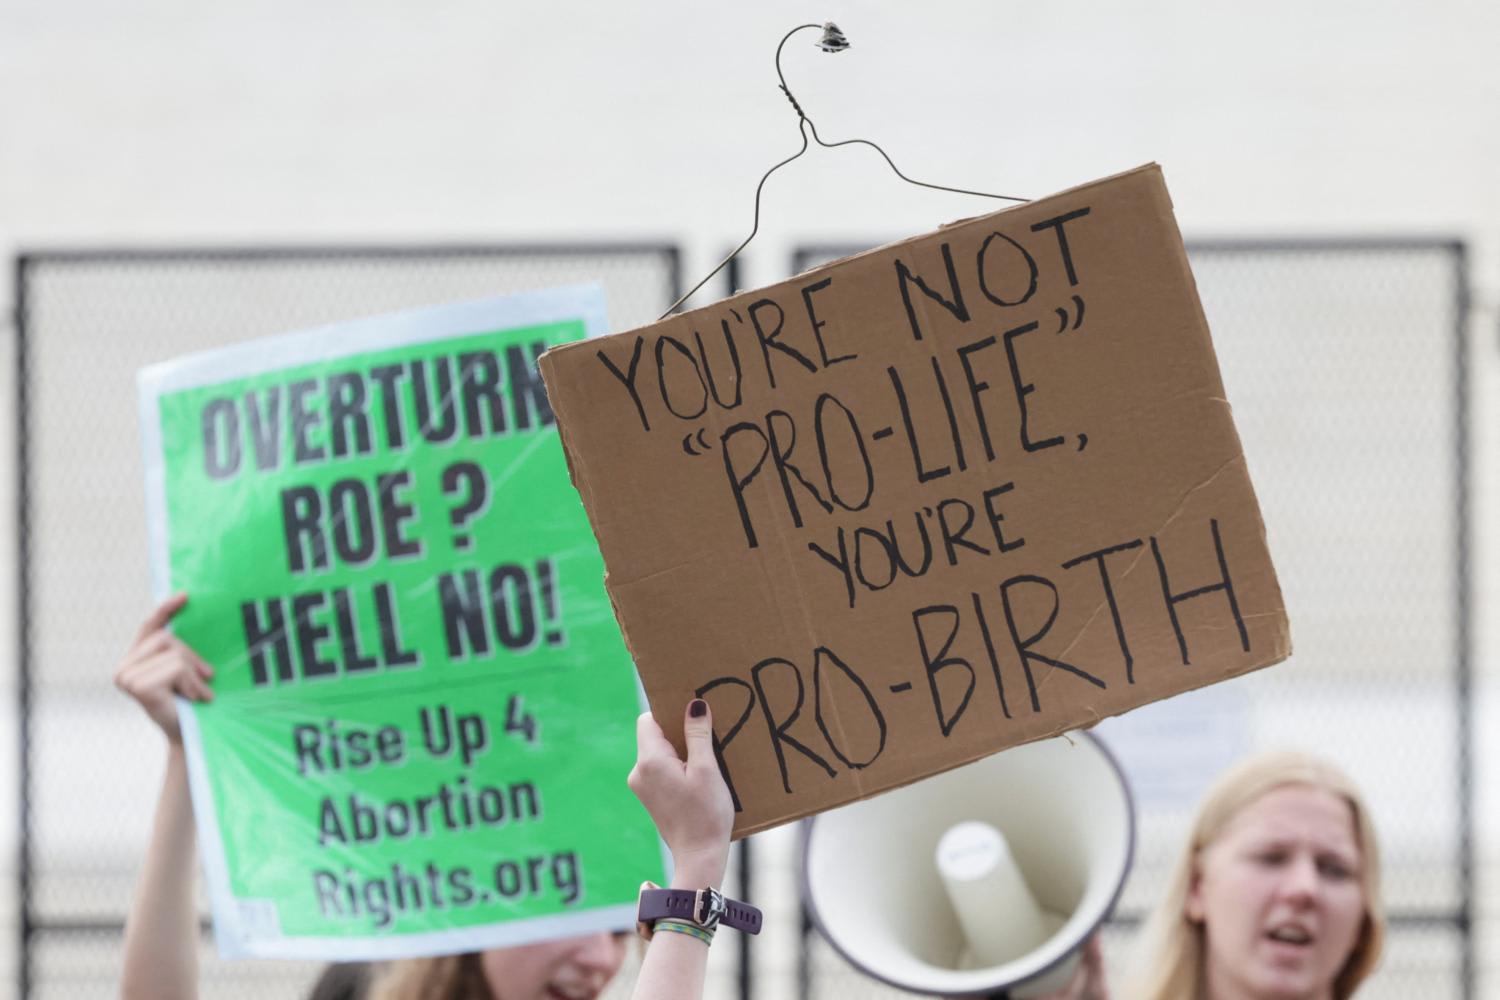 <p>Abortion rights demonstrators protest outside the United States Supreme Court as the court rules in the Dobbs v Women’s Health Organization abortion case, overturning the landmark Roe v Wade abortion decision in Washington, US, on June 24, 2022.&nbsp;&nbsp;</p>
